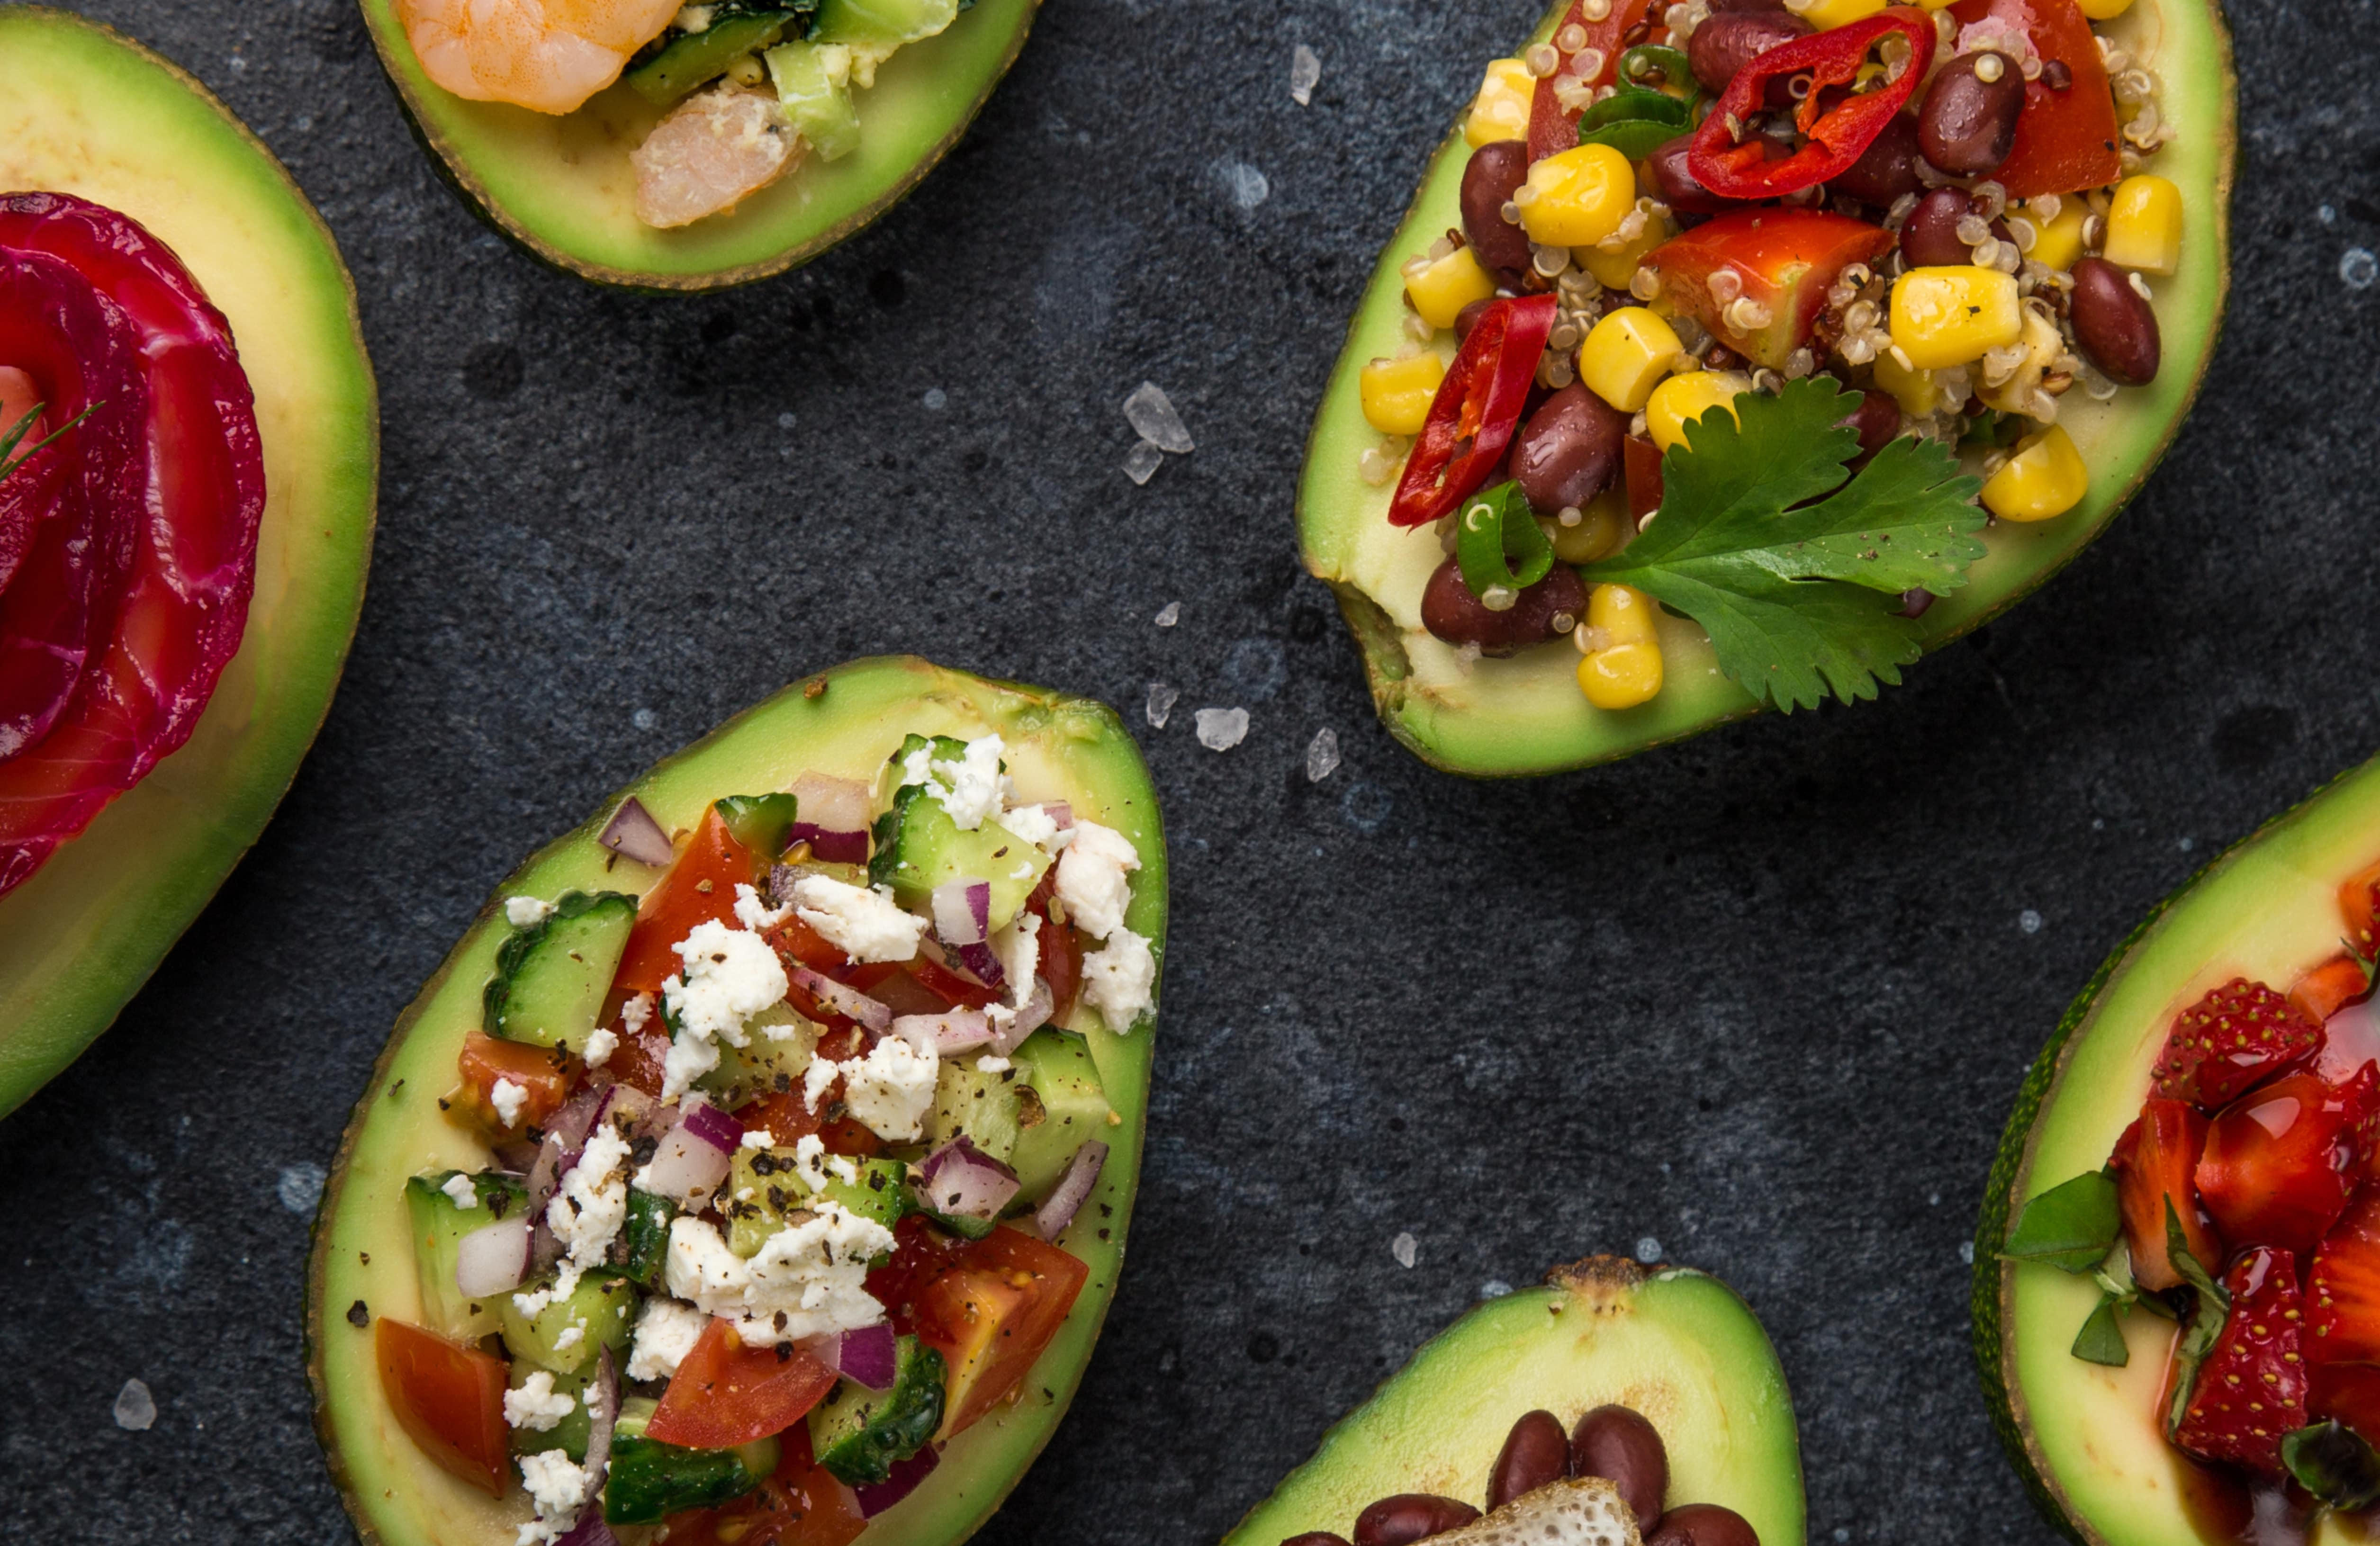 Cover_Baked_Avocado_with_Beans.jpg